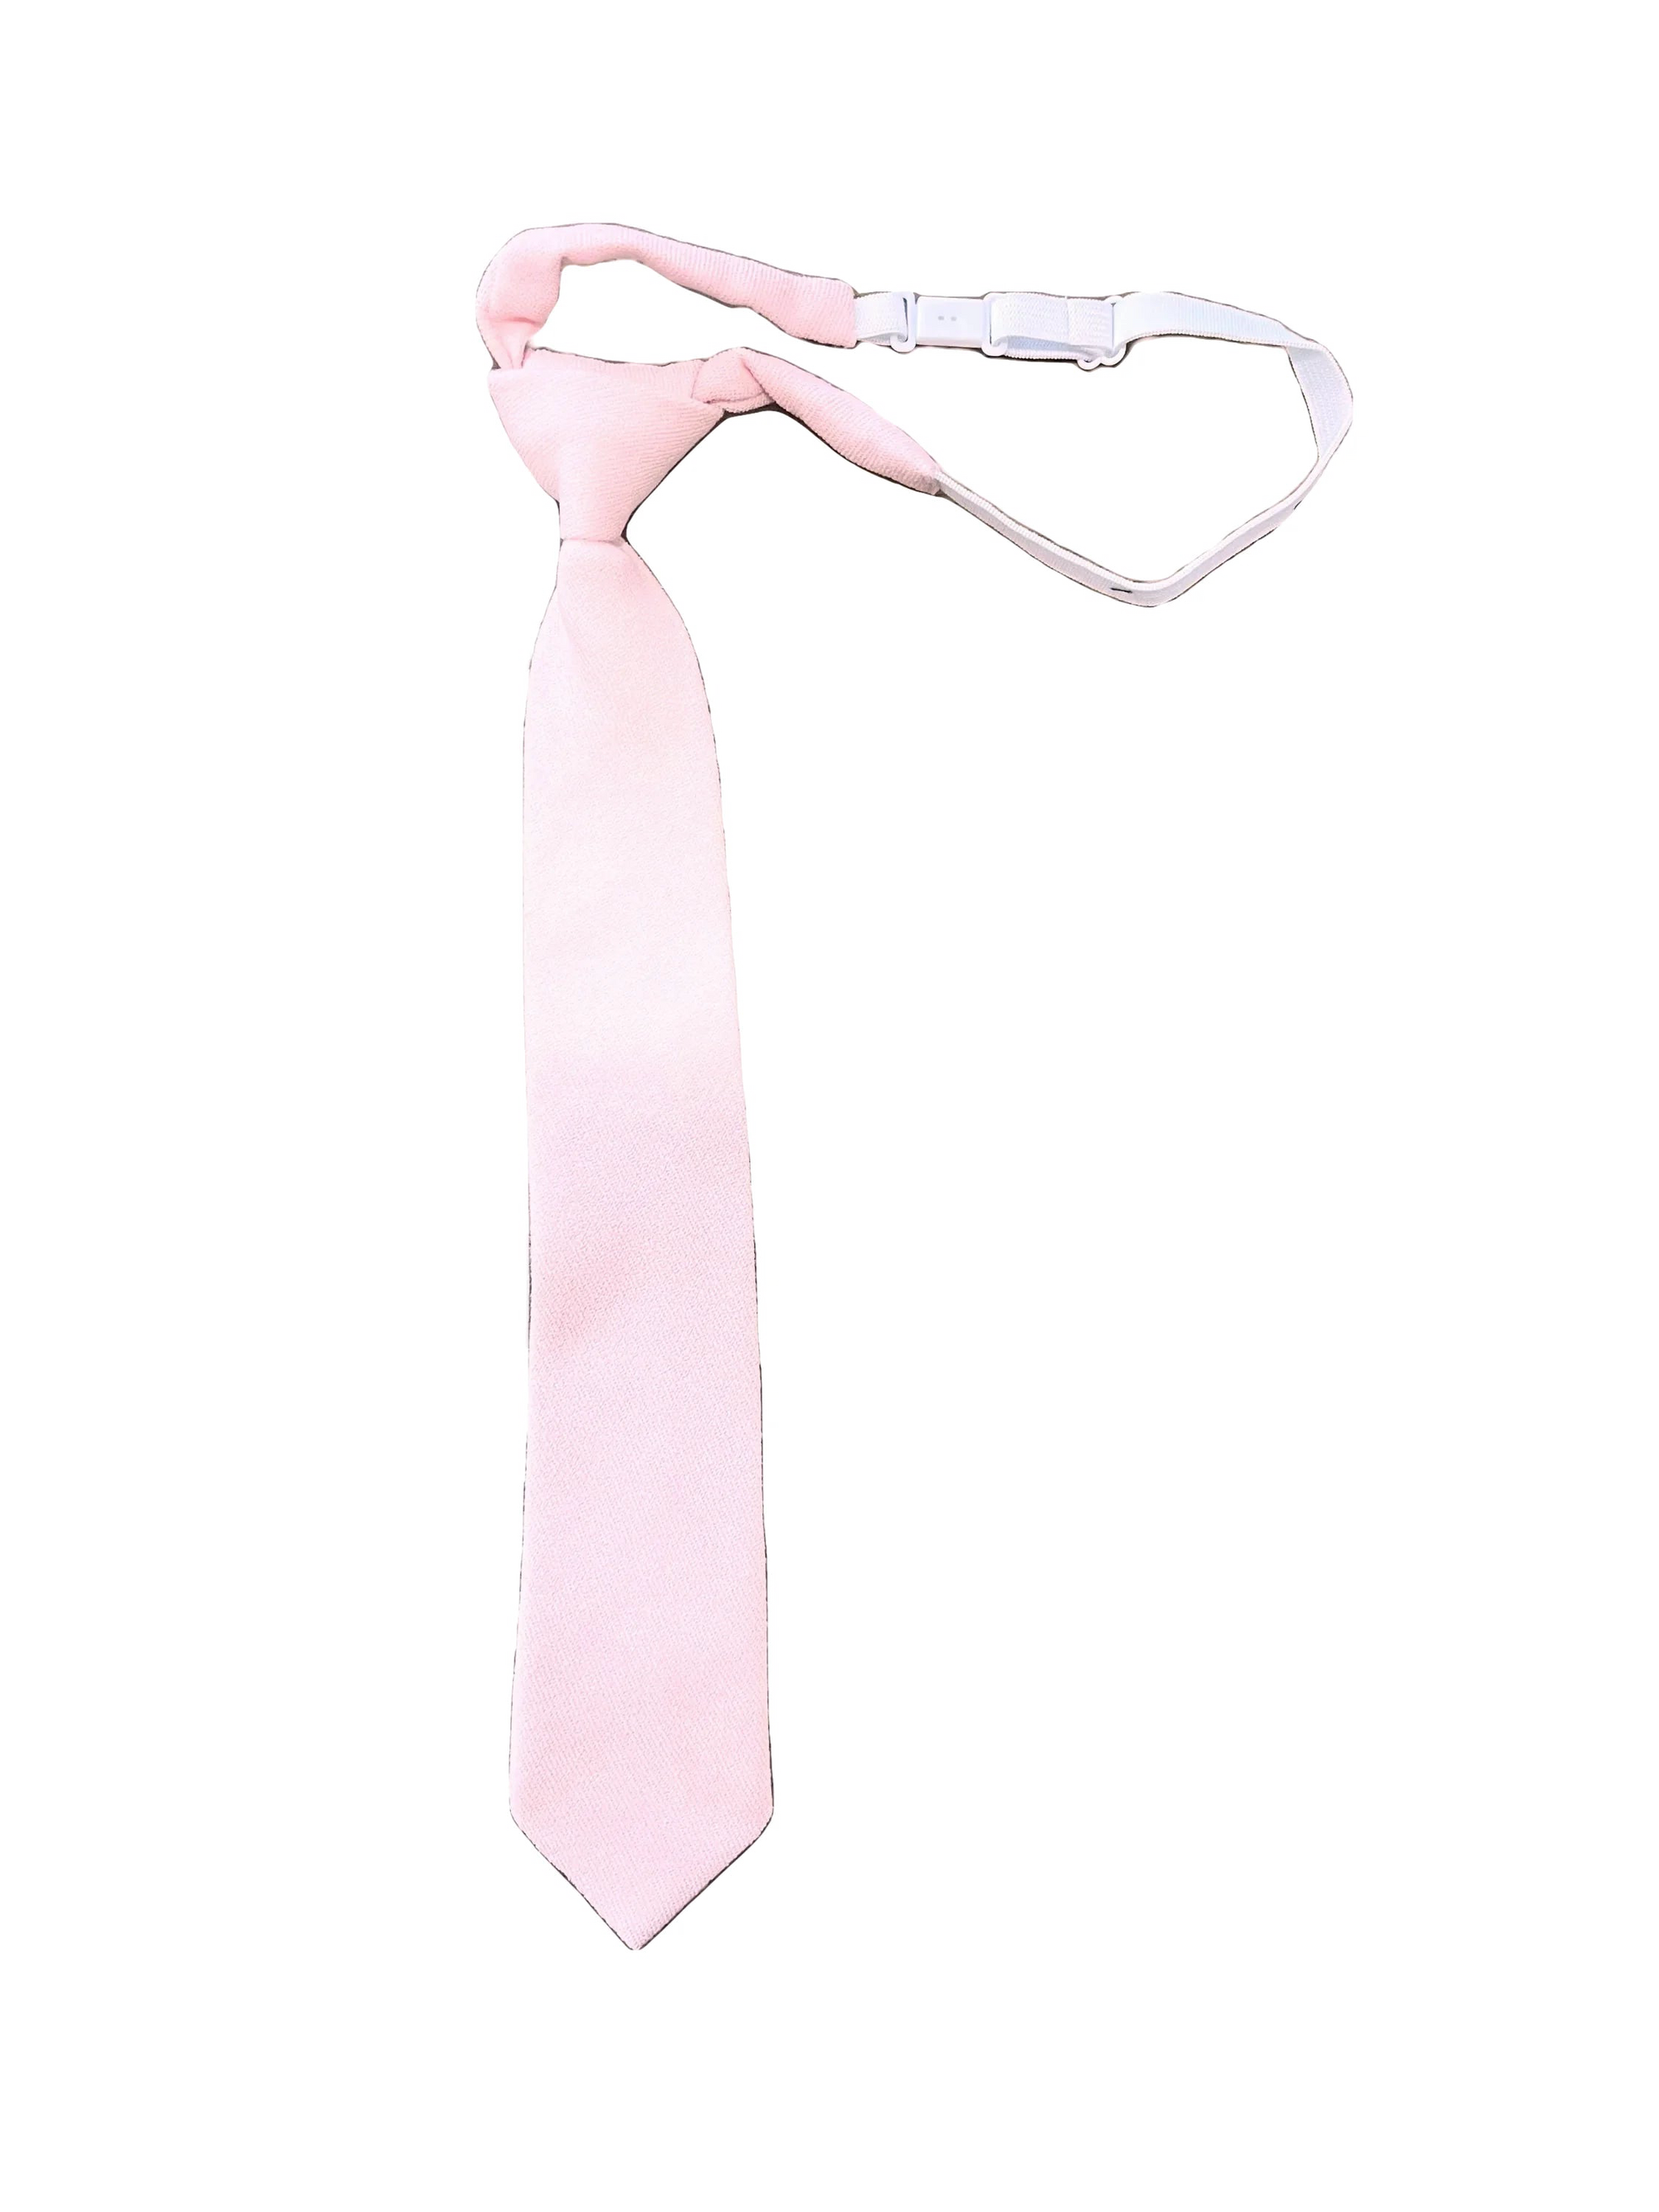 Pink Tie For Kids (Strap) CORA Skinny Fit-Pink Tie For Kids Material: Sued Color: Pink Approx Size: Max width: 6.5 cm / 2.36 inches Length: 37 Cm / 14.56 Inches Have a little one that you need to dress up for a wedding or other formal event? spoil them rotten with this CORA Pink Kids and Toddlers Clip On Tie. This tie is absolutely darling, and will have them looking their best. The clip on design makes it easy to put on and take off, so even the squirmiest of kids can wear it with ease. You'll 